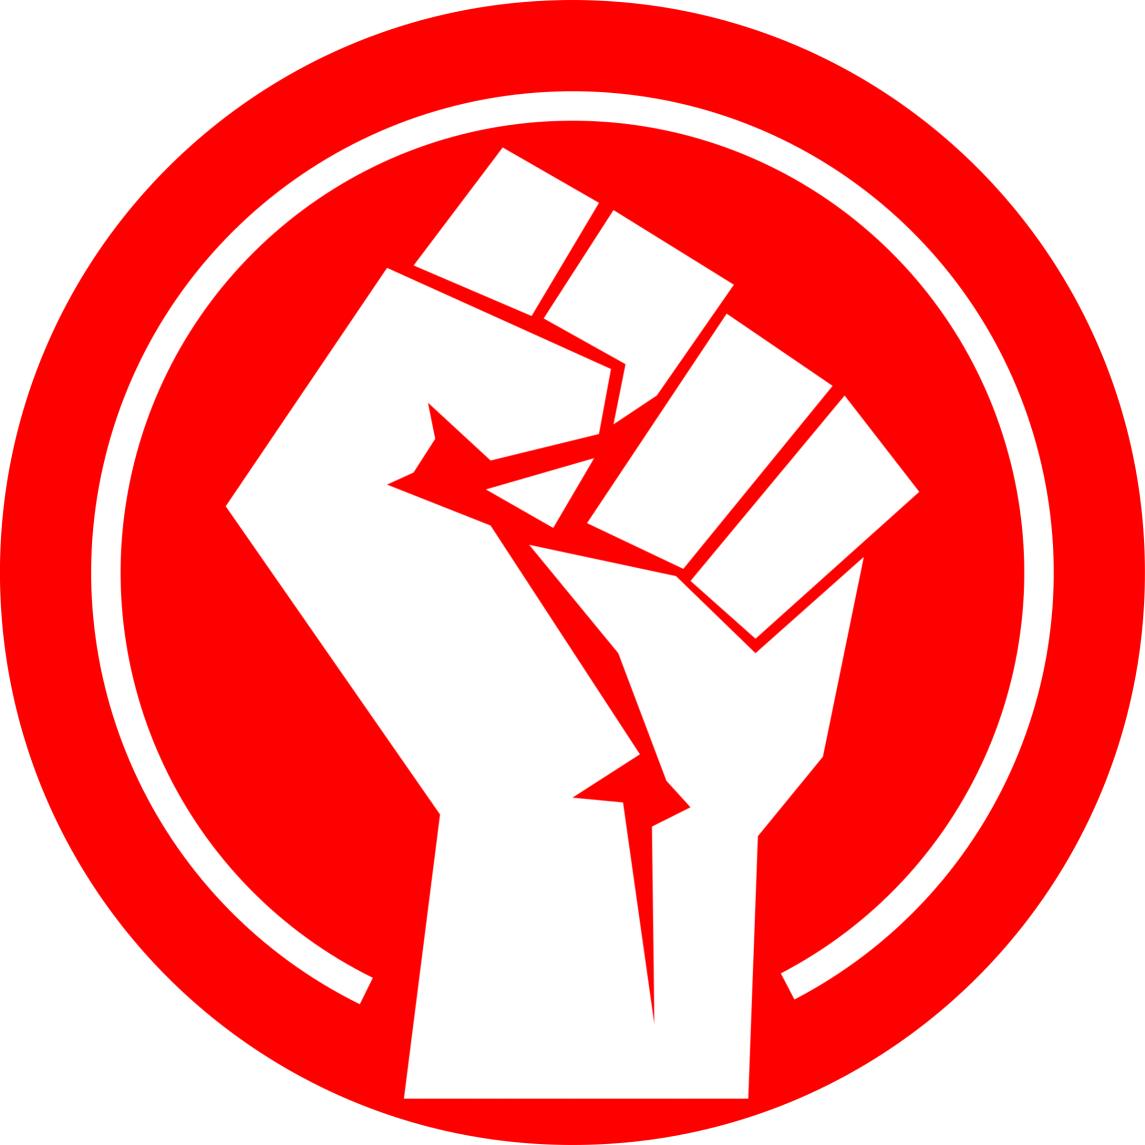 High Quality Marxist blm Left Fist Logo with transparency Blank Meme Template